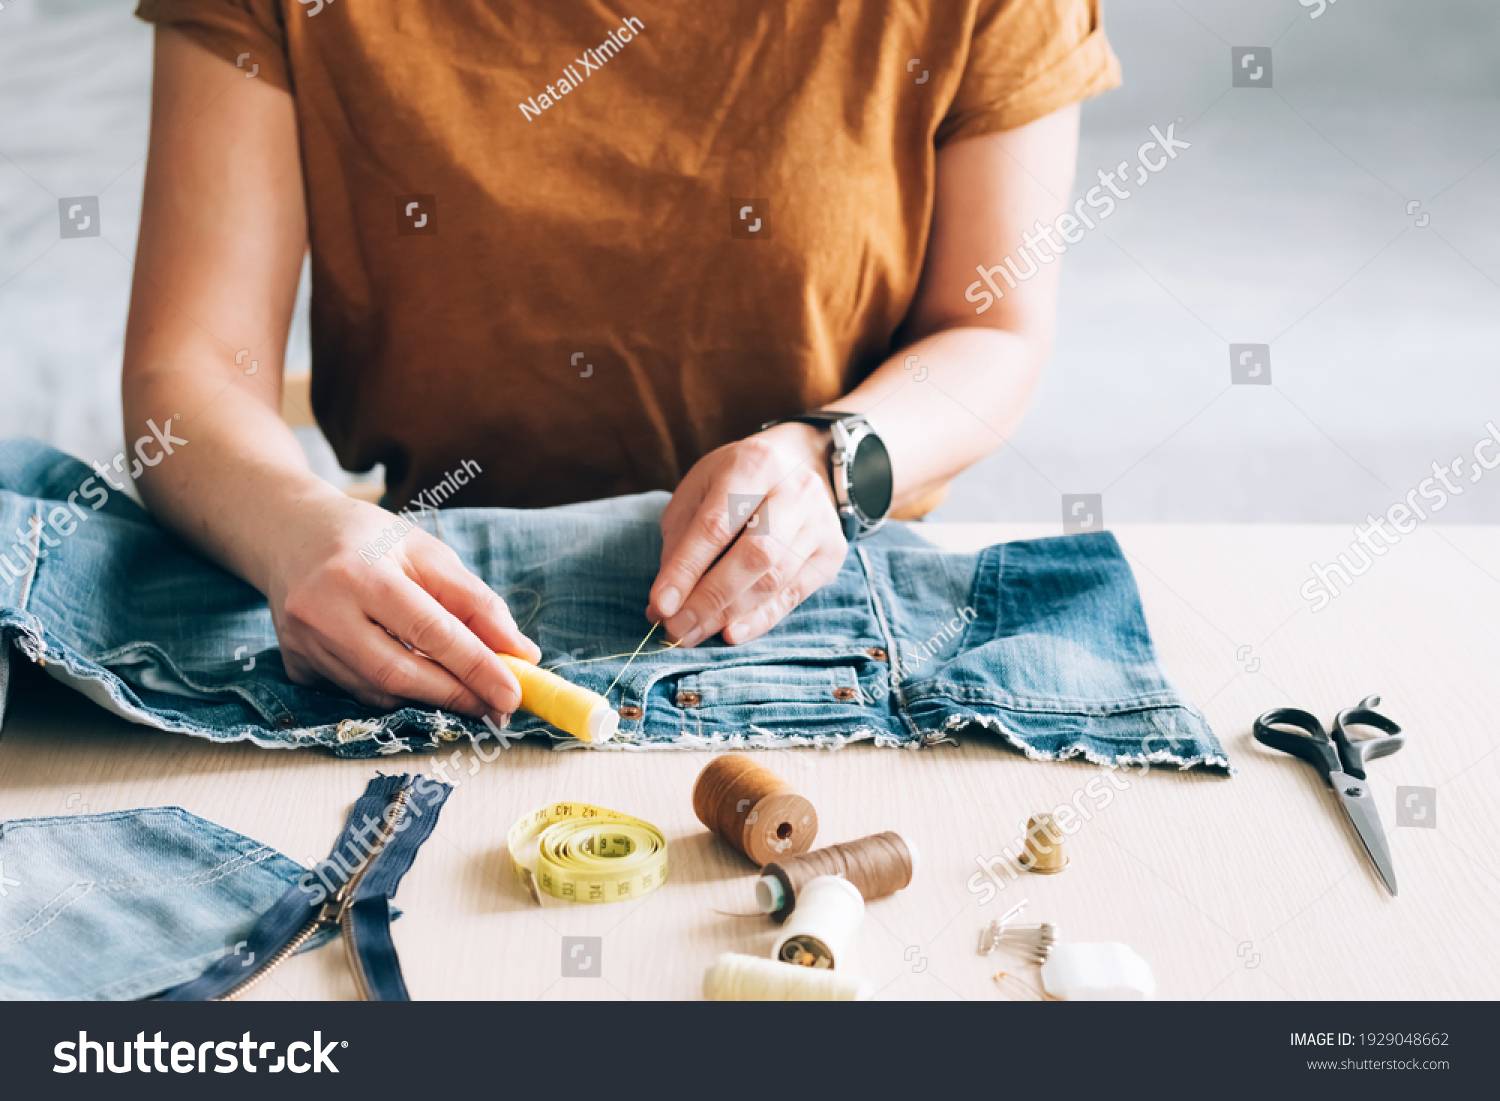 Woman repairs sews reuses fabric from old denim clothes economical reuse #1929048662